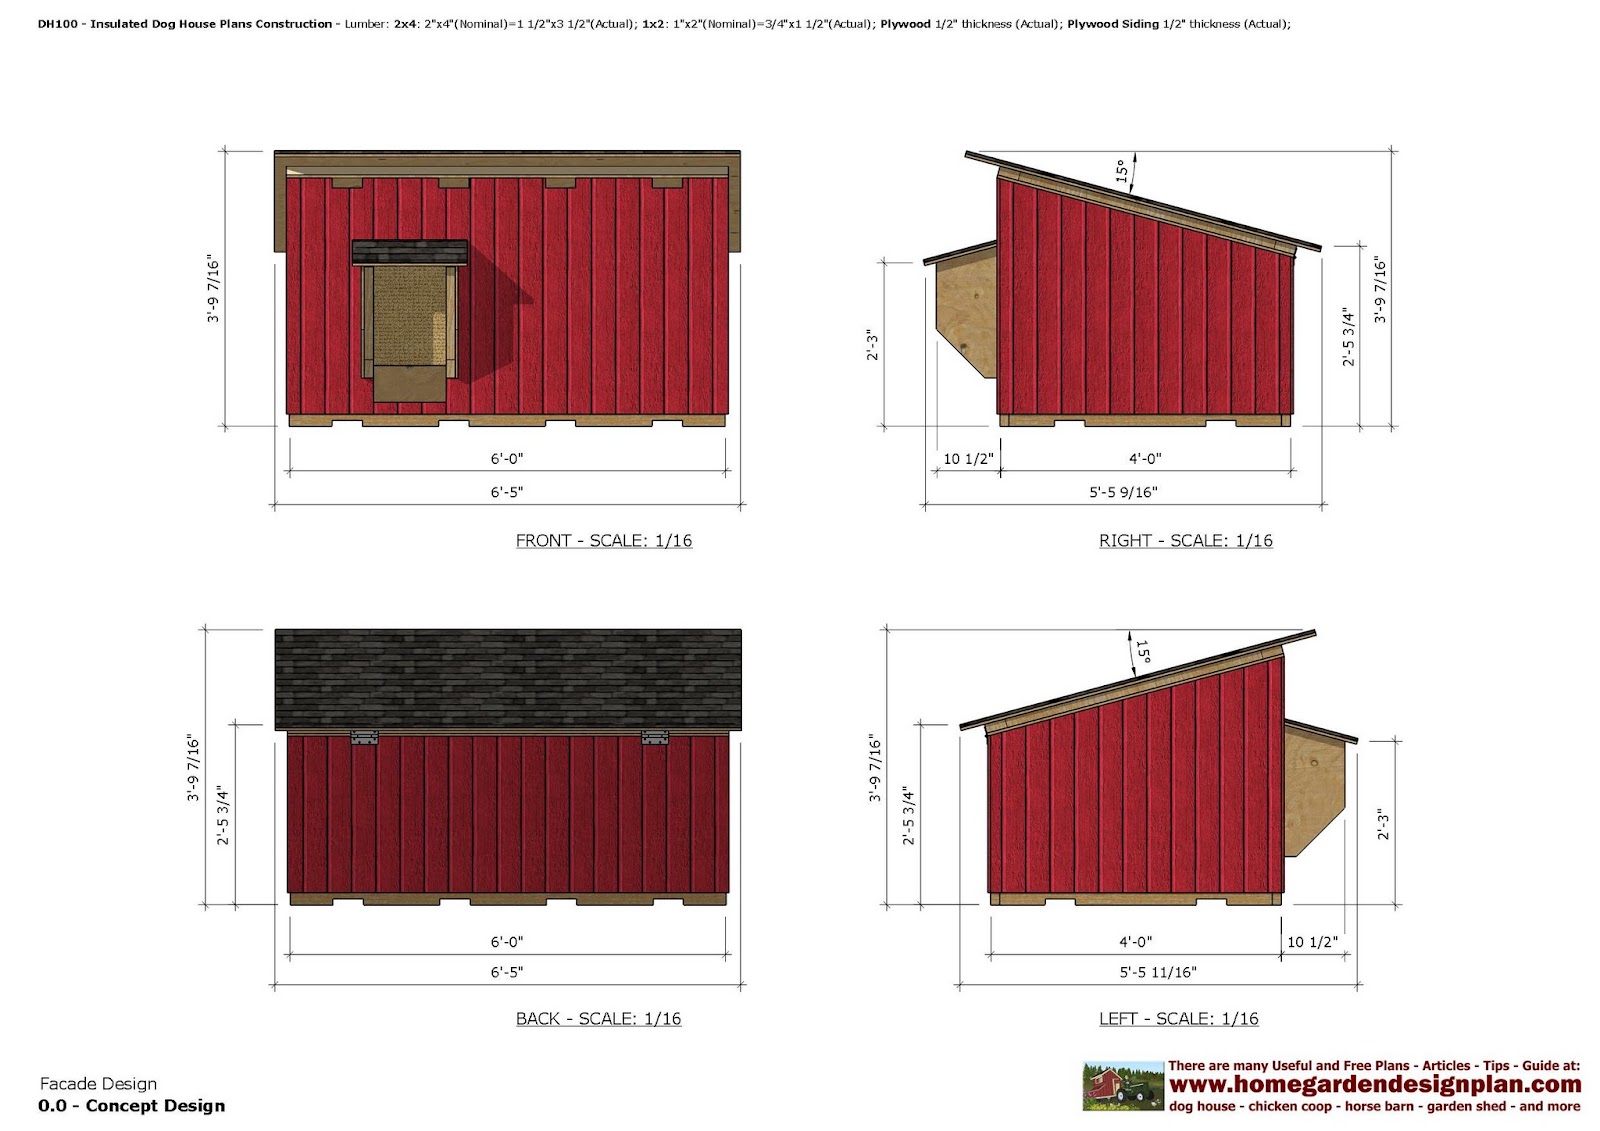 home garden plans: DH100 - Insulated Dog House Plans - Dog 